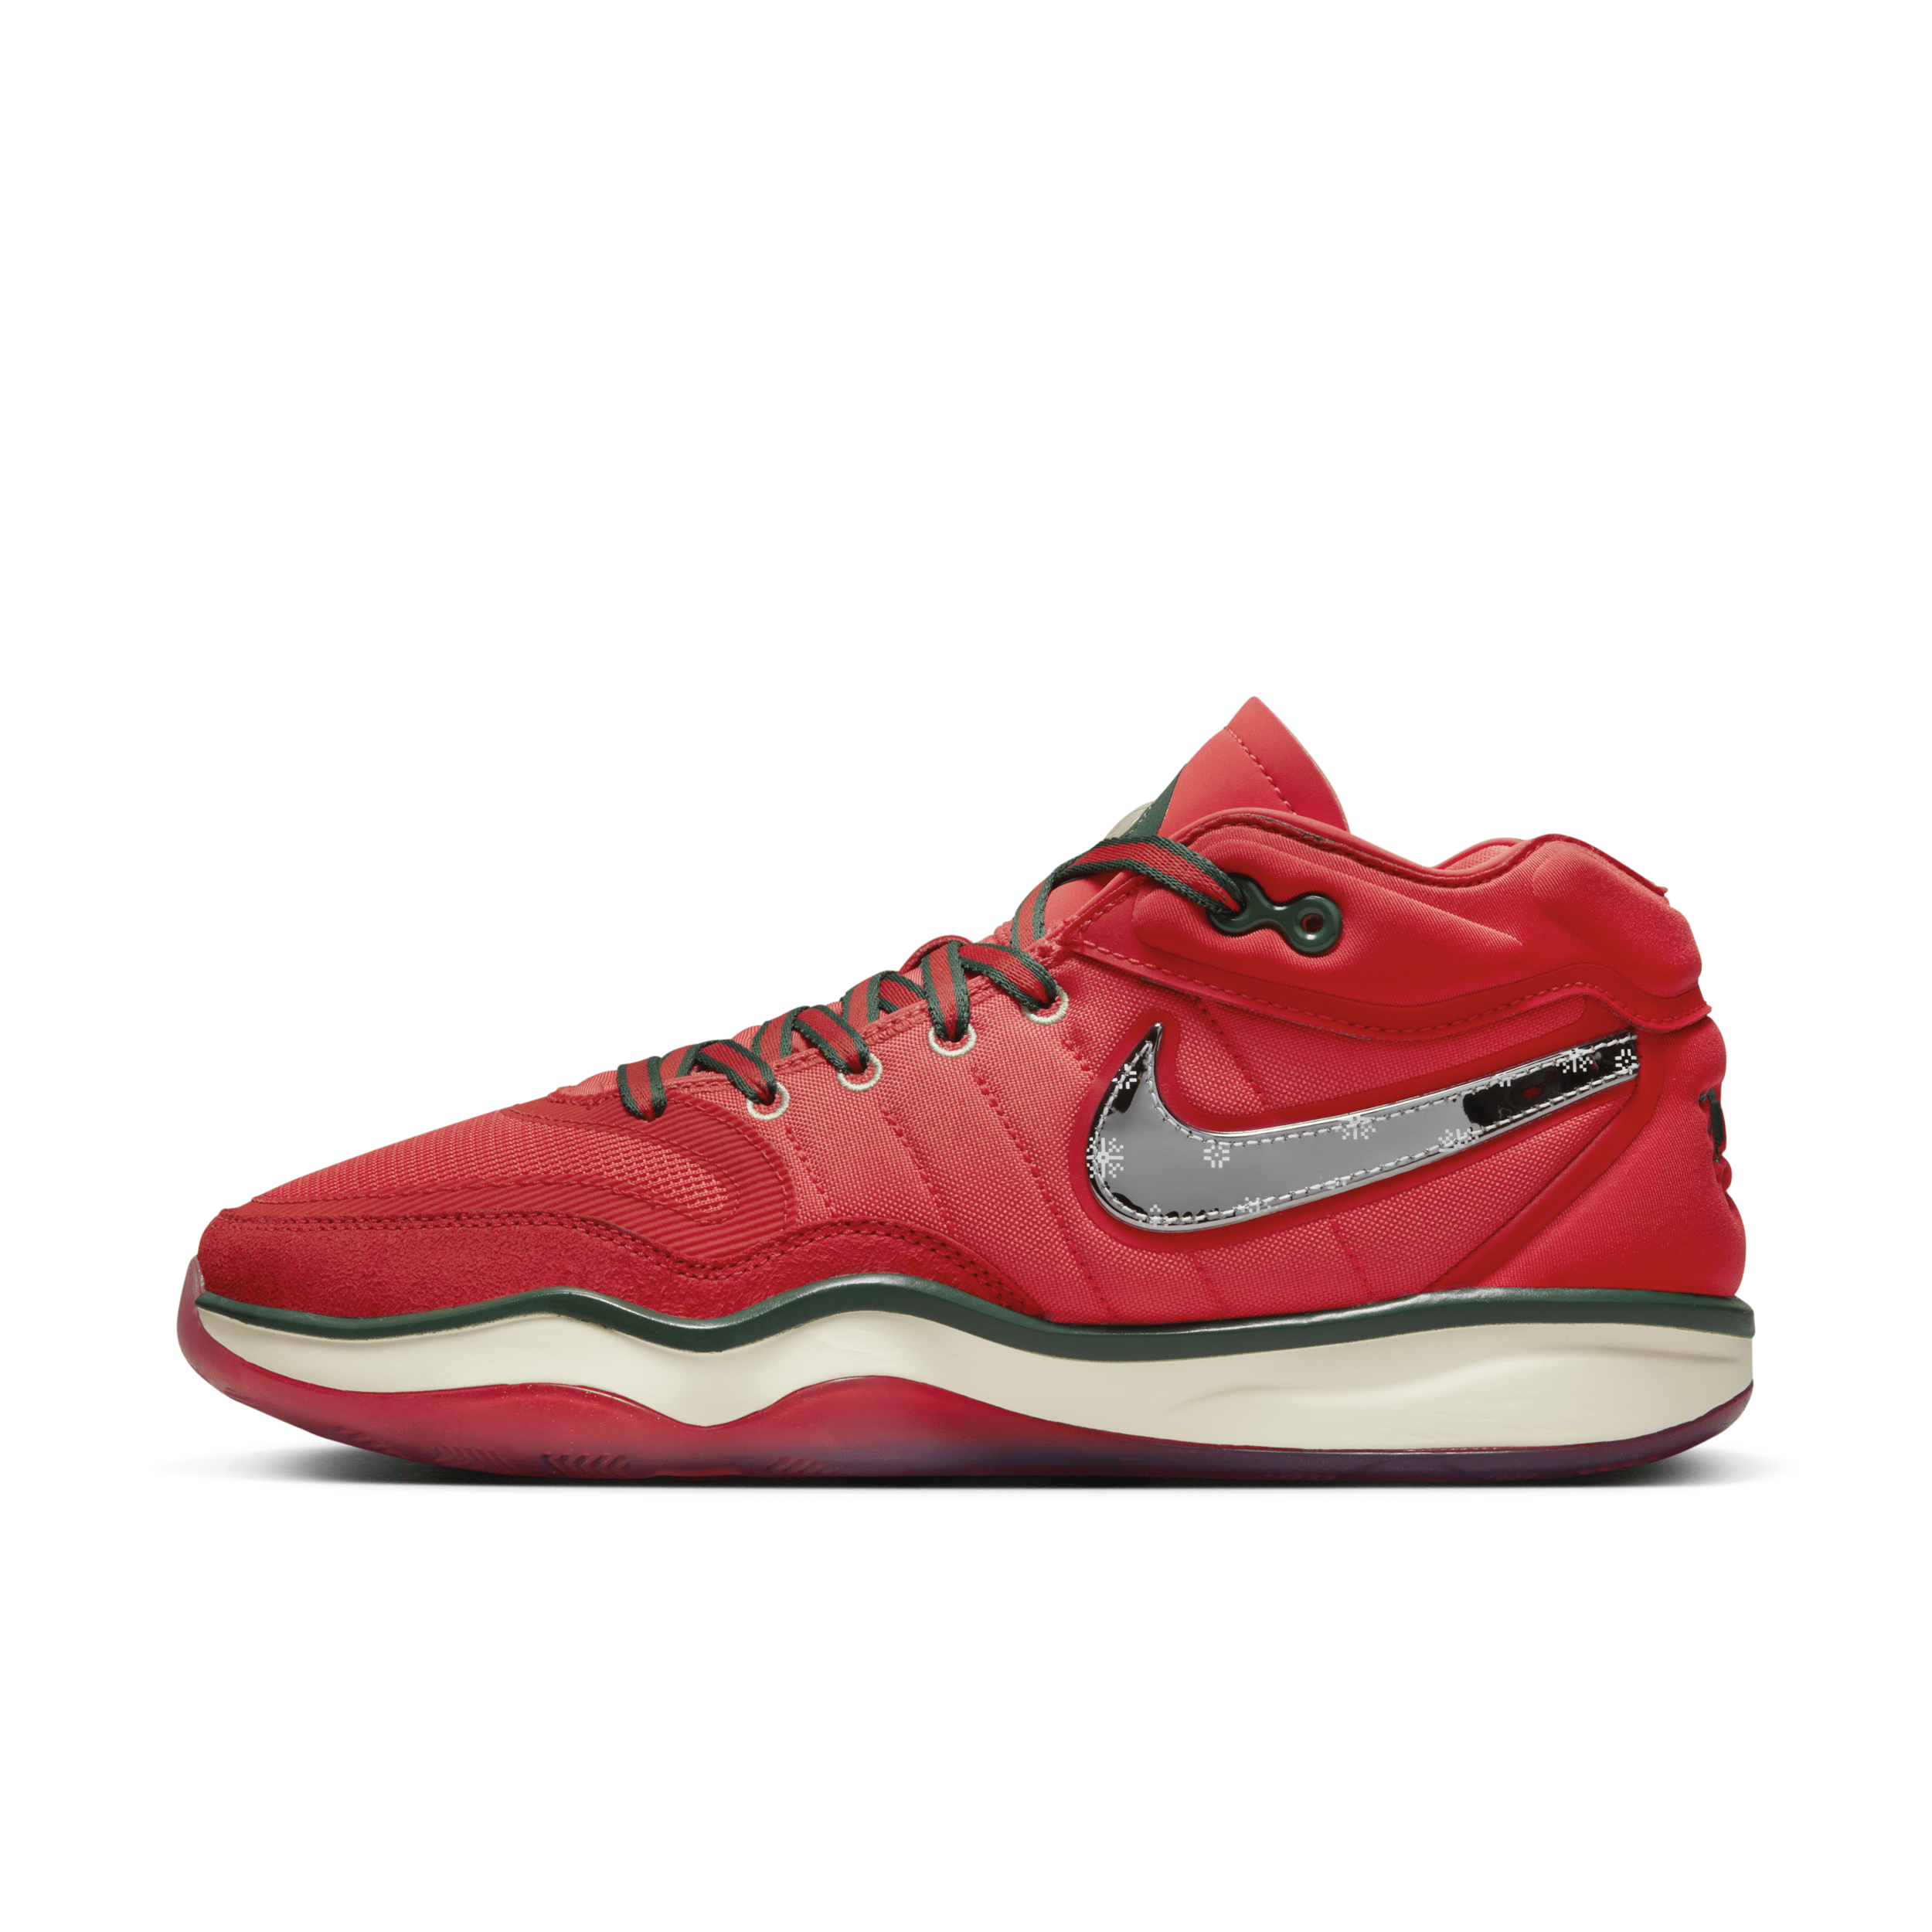 Nike Men's G.t. Hustle 2 Basketball Shoes In Red